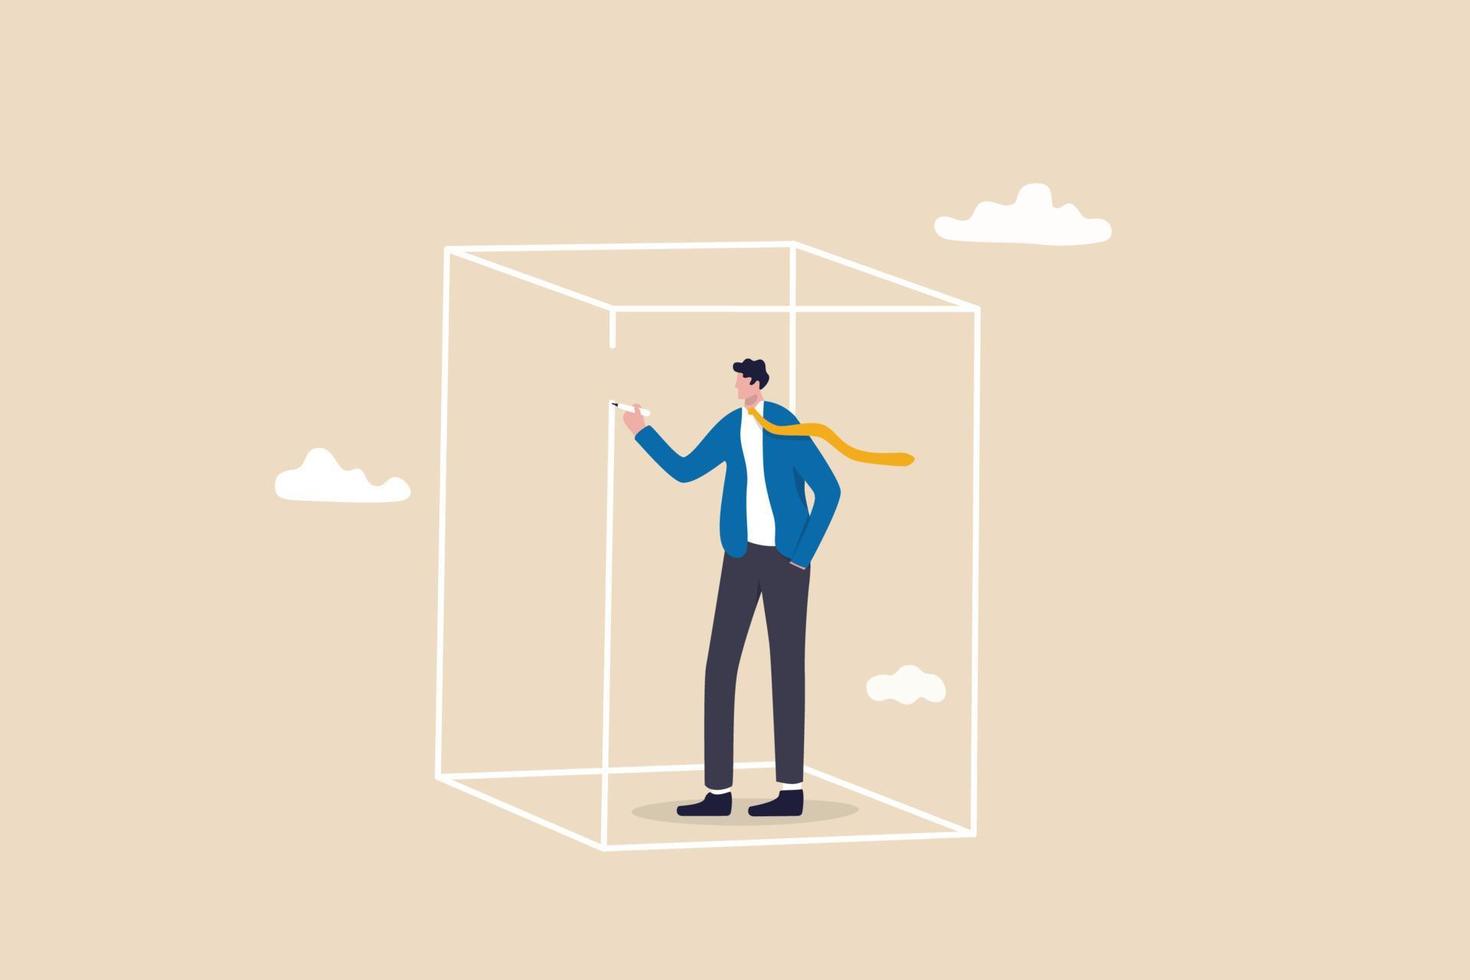 Set privacy zone, personal barrier to focus or work boundary, space to be with yourself concept, introvert businessman drawing box to cover privacy zone or boundary to protect from distraction. vector